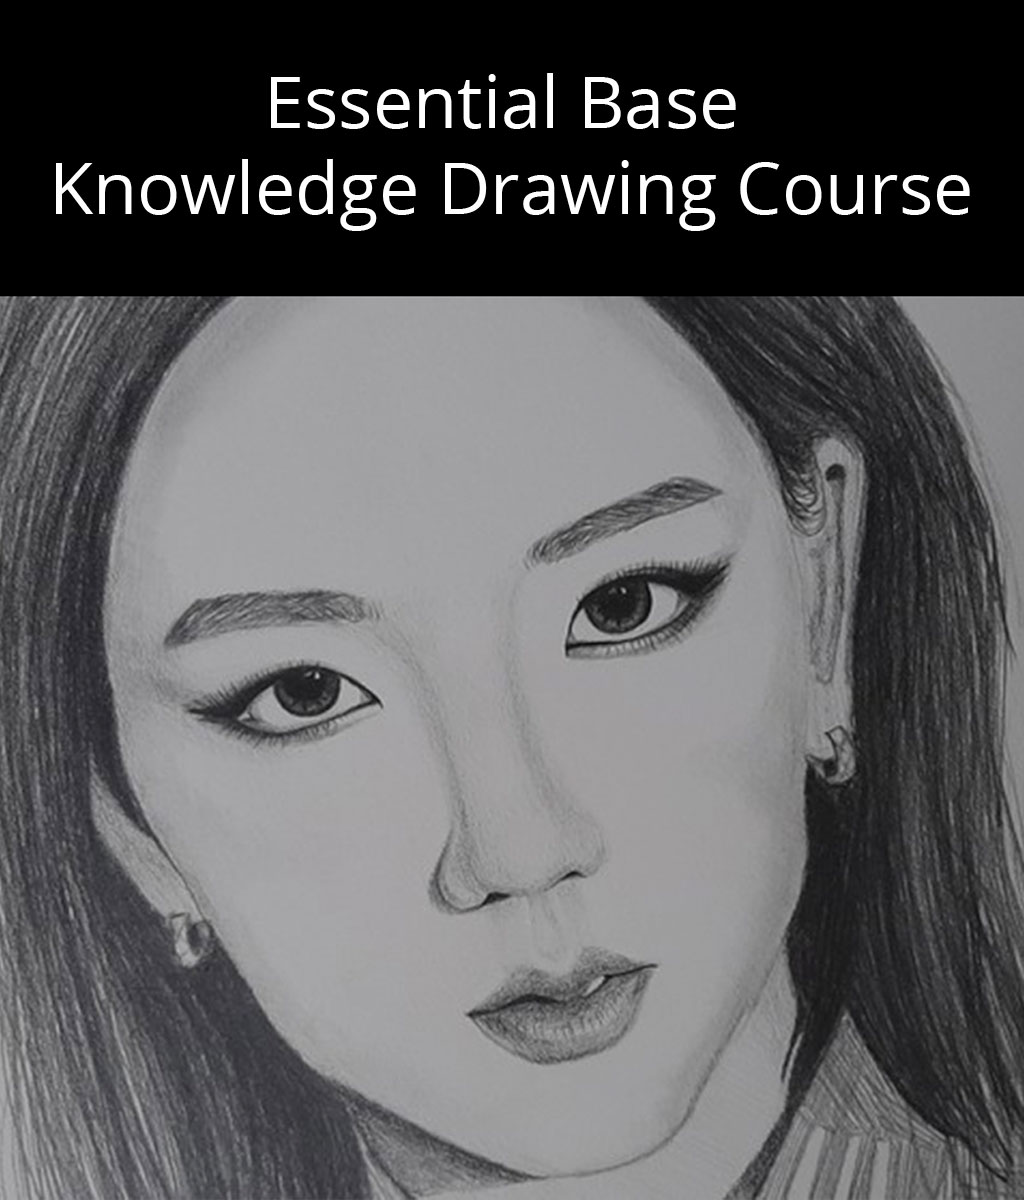 Essential Base Knowledge Drawing Course